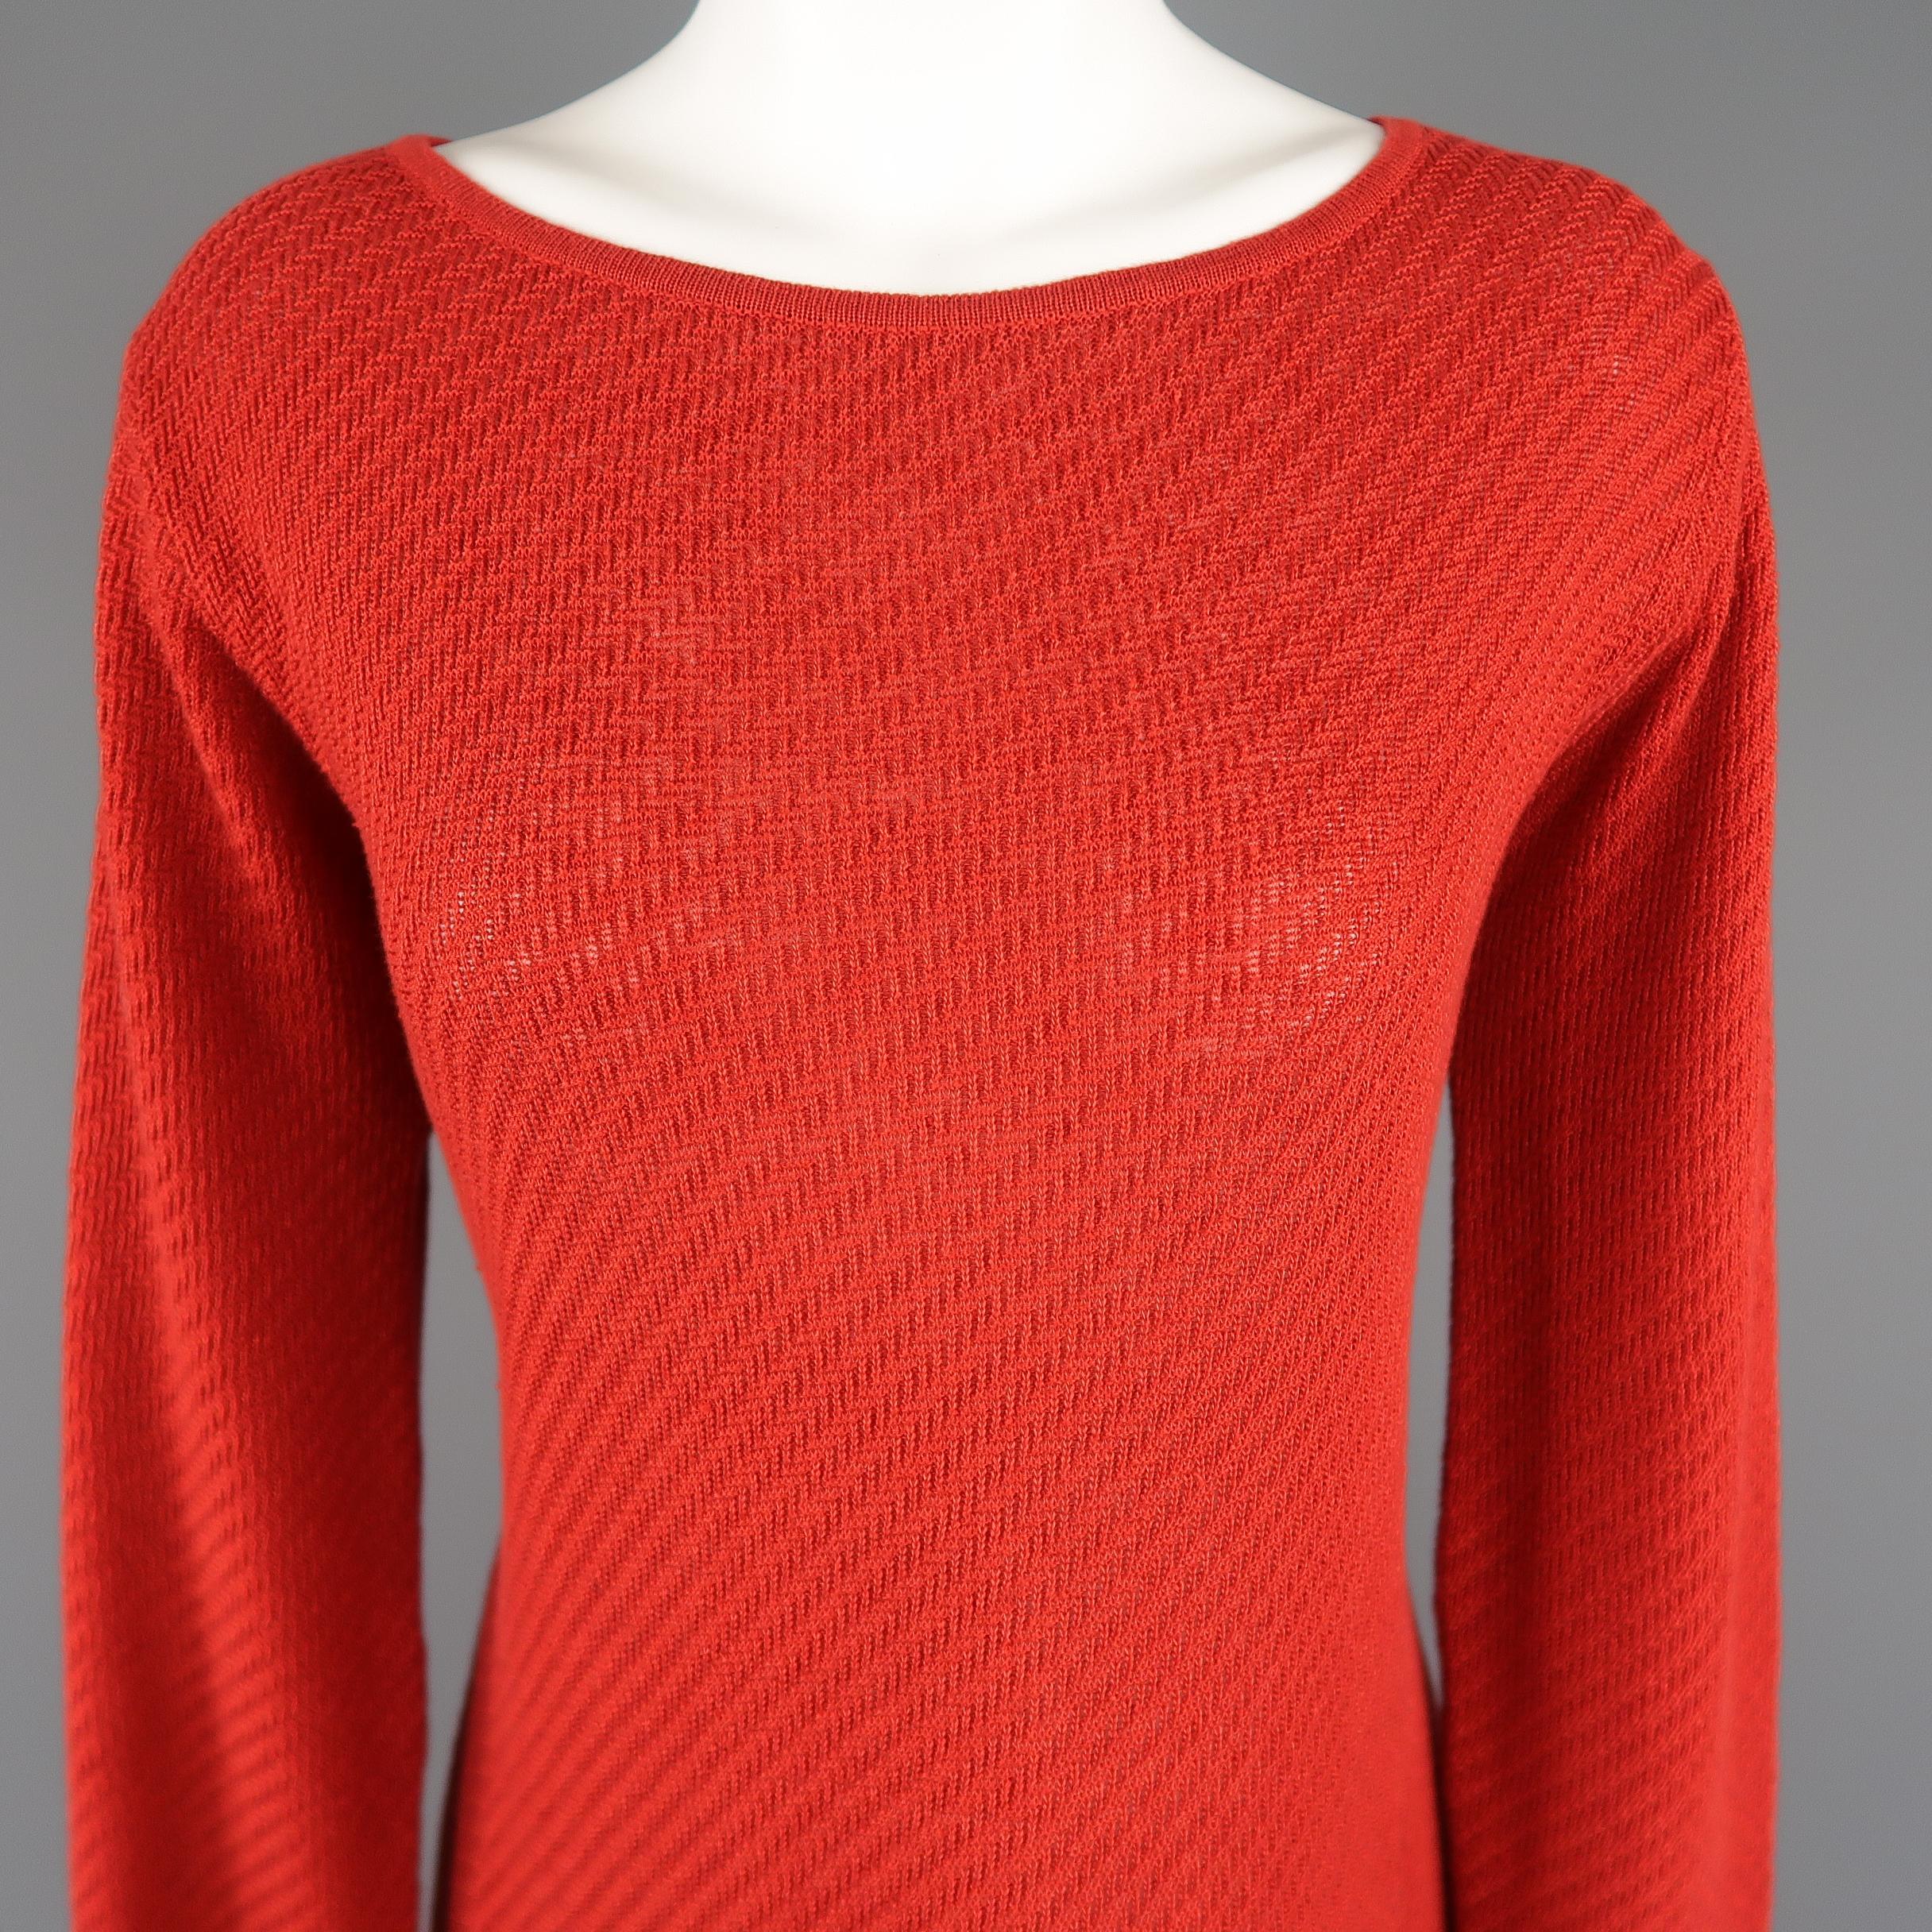 RALPH LAUREN COLLECTION pullover sweater tunic comes in red linen knit with a boat neck, long sleeves, and double slit hem.
 
Excellent Pre-Owned Condition.
Marked: L
 
Measurements:
 
Shoulder: 16 in.
Bust: 40 in.
Sleeve: 21 in.
Length: 35 in.